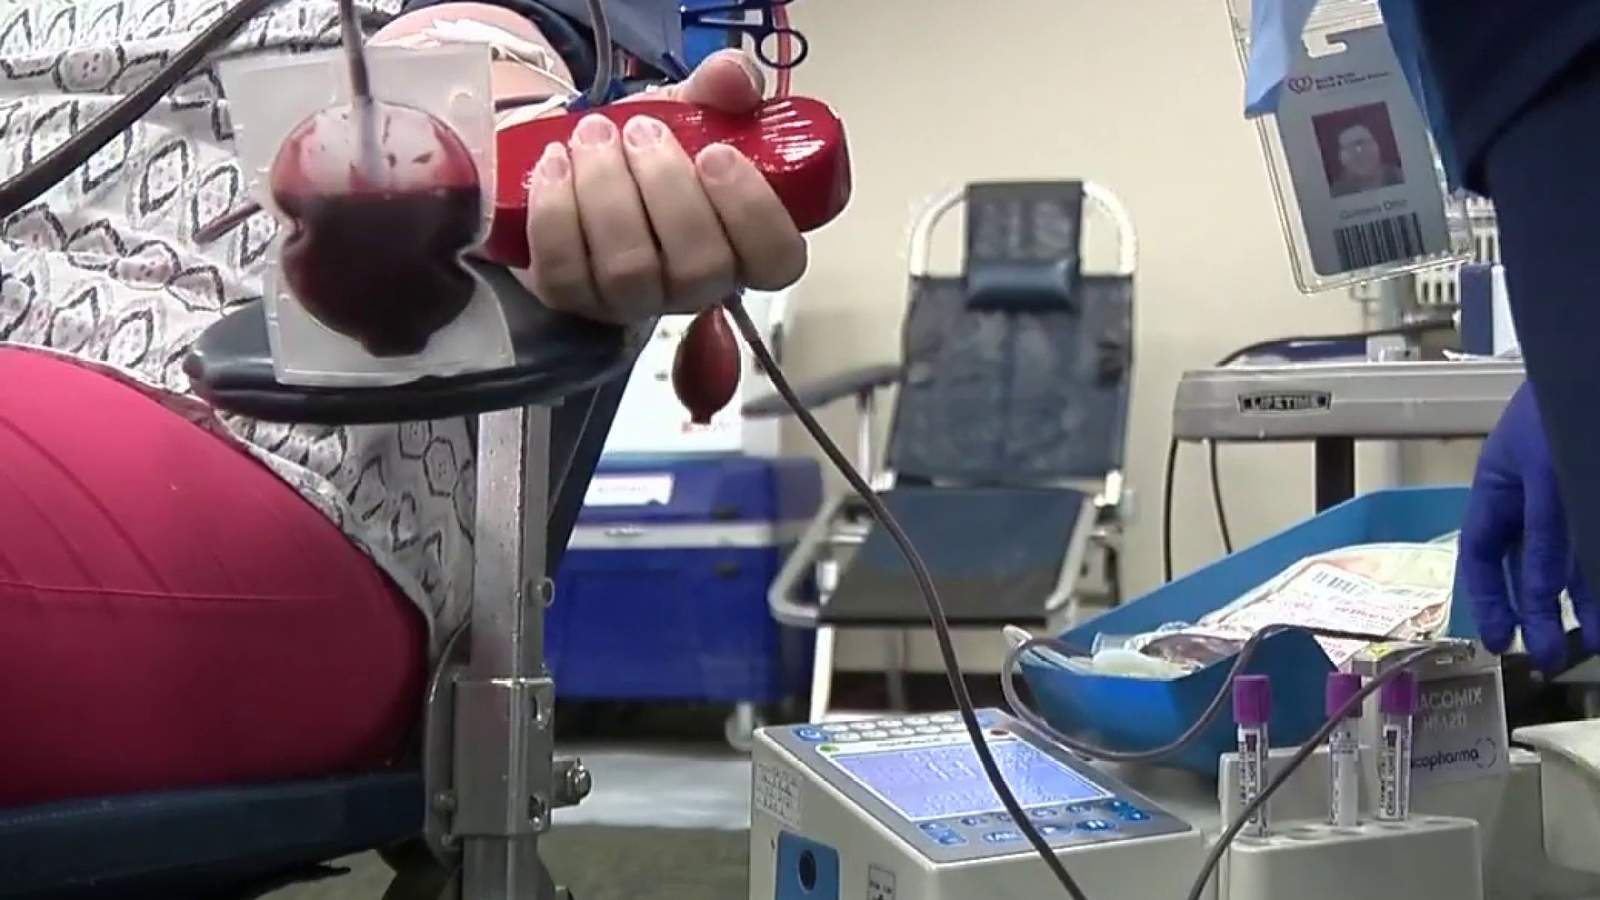 Blood types O negative and positive urgently needed in San Antonio hospitals